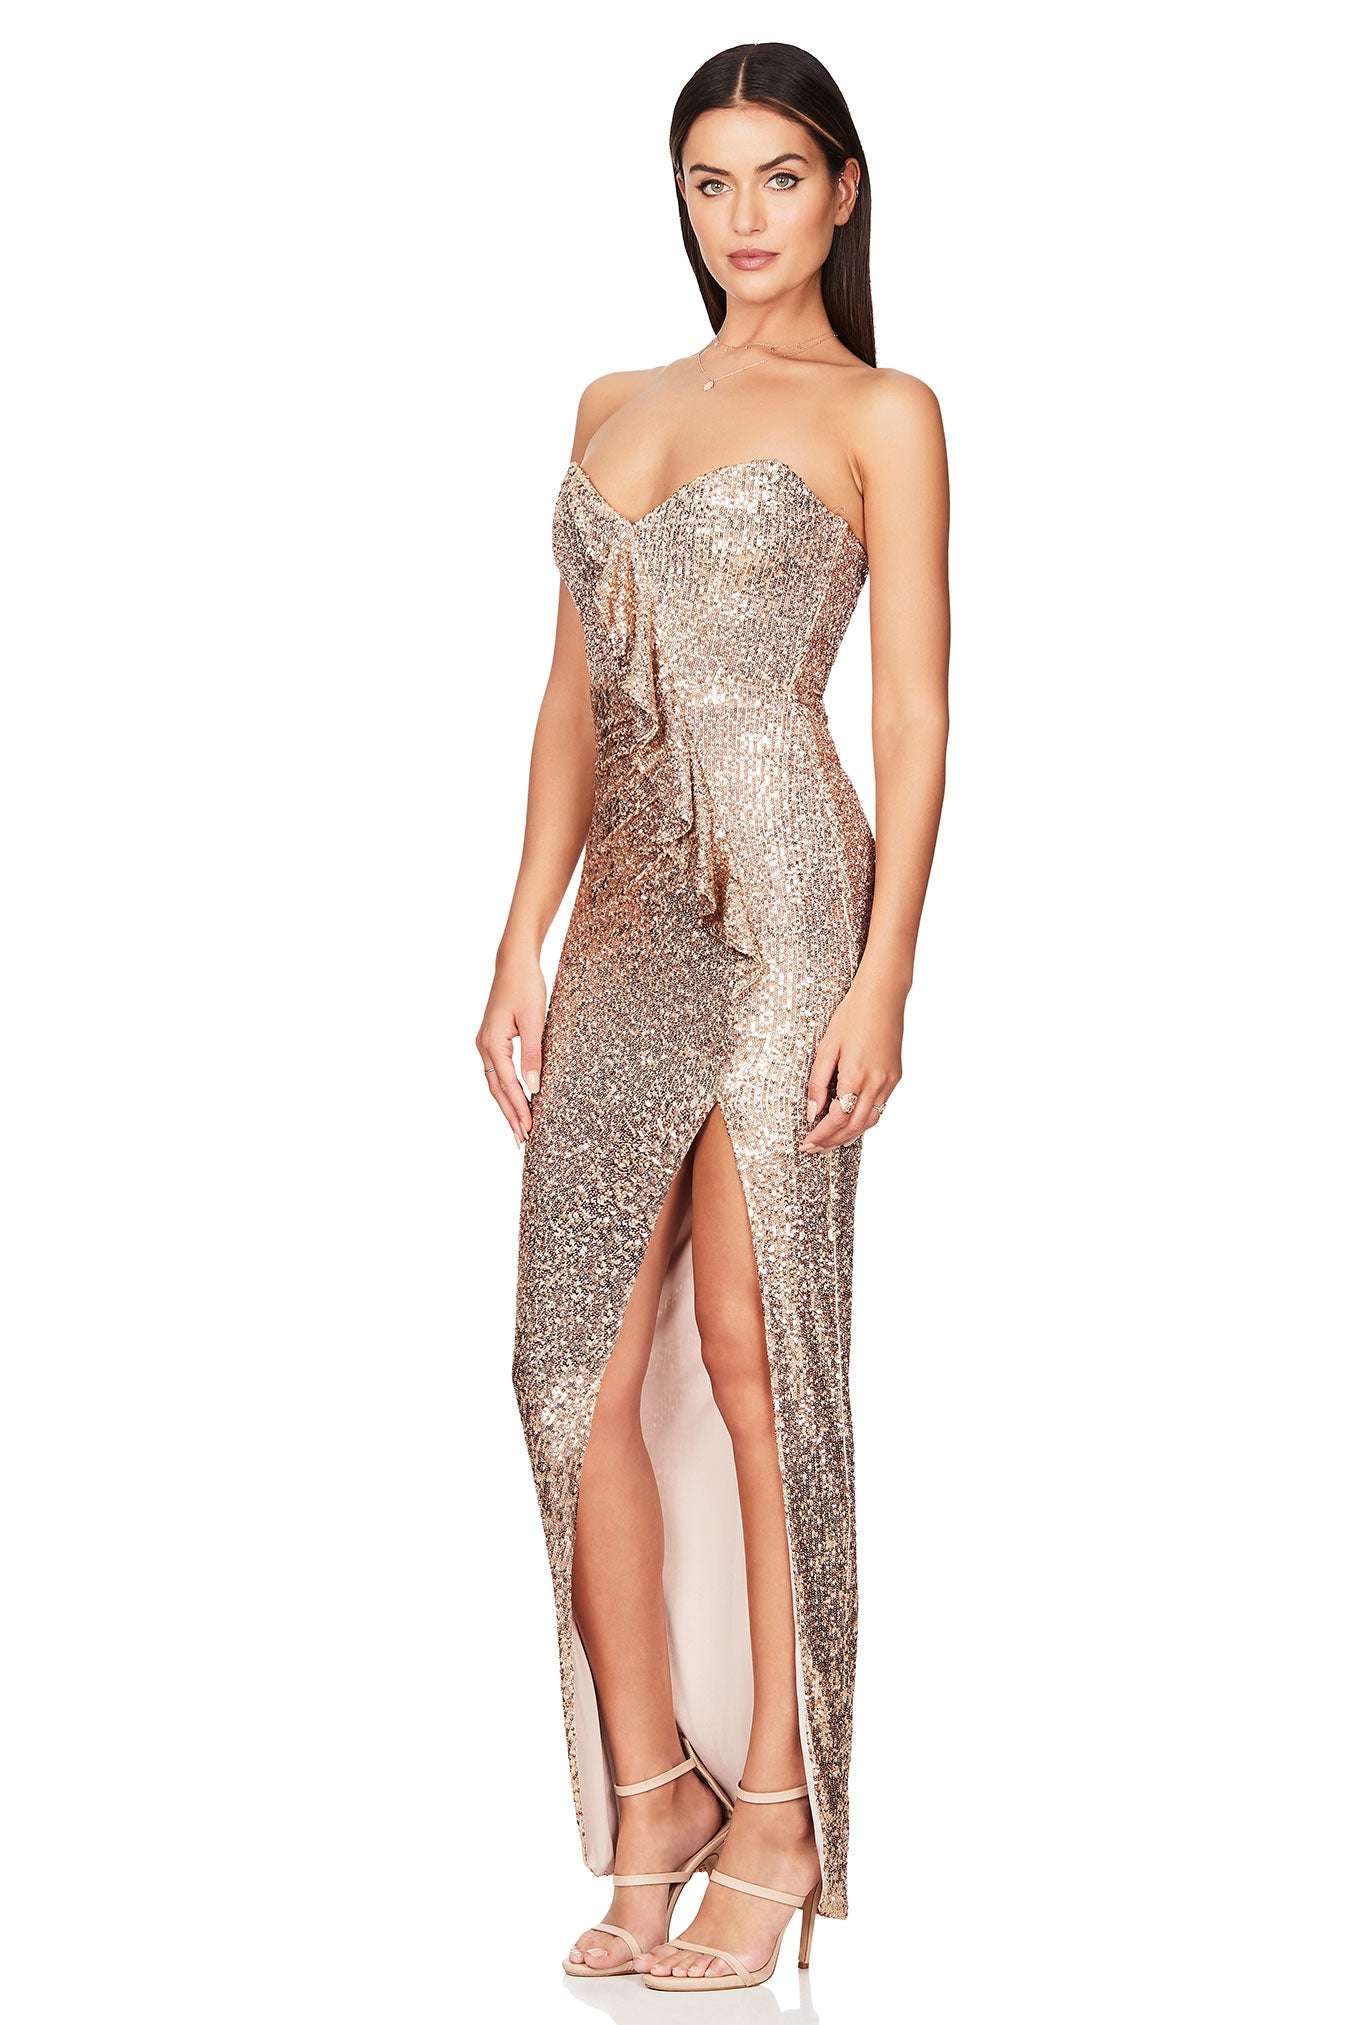 Nookie BUY IT NOOKIE Galaxy Gown (Gold) - nookie-galaxy-gown-gold---rrp-9-dress-for-a-night-30755469_9394c748-af44-4bf6-8de5-a4cd80aec2dc.jpg